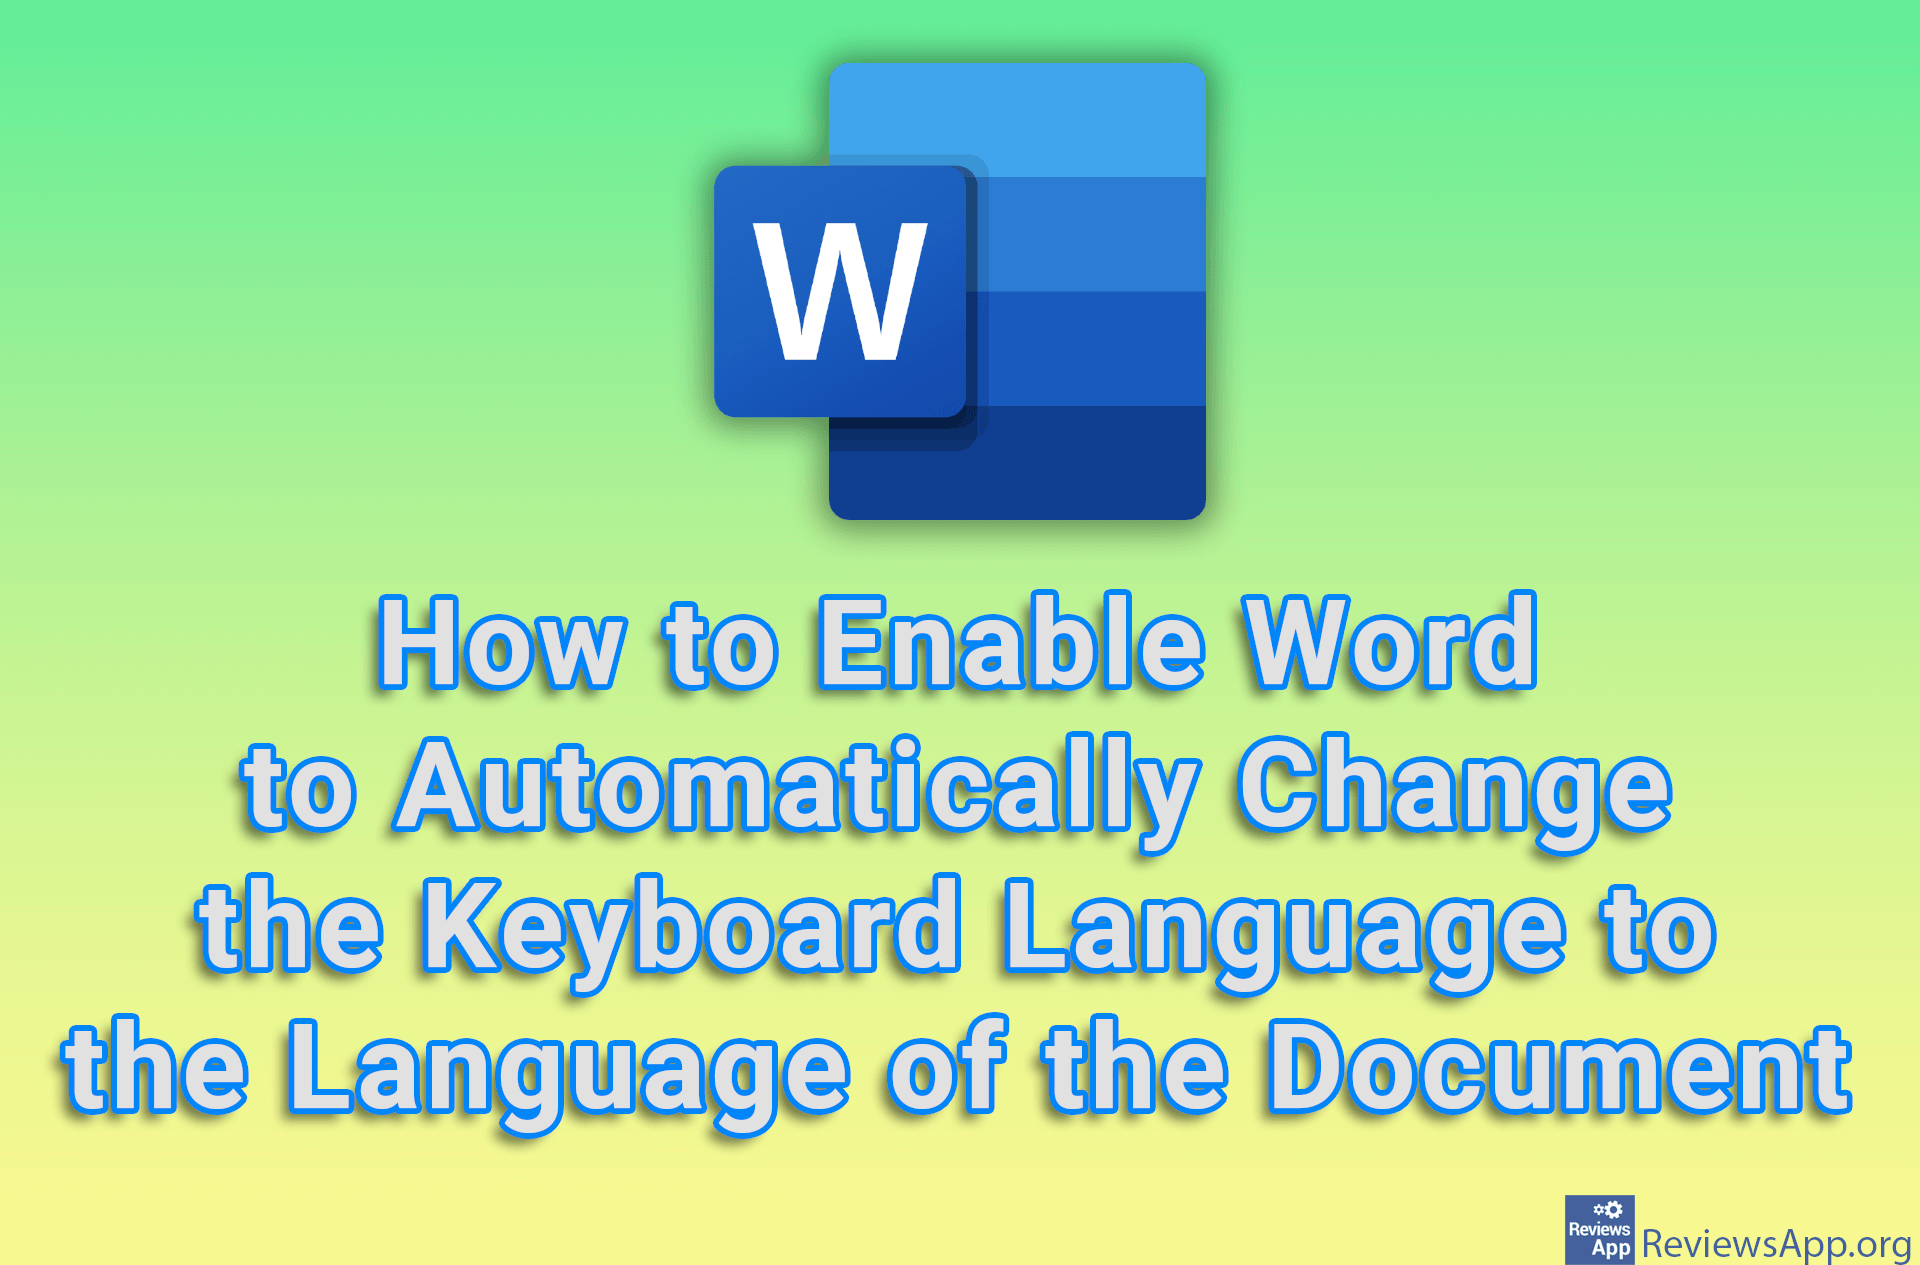 How to Enable Word to Automatically Change the Keyboard Language to the Language of the Document